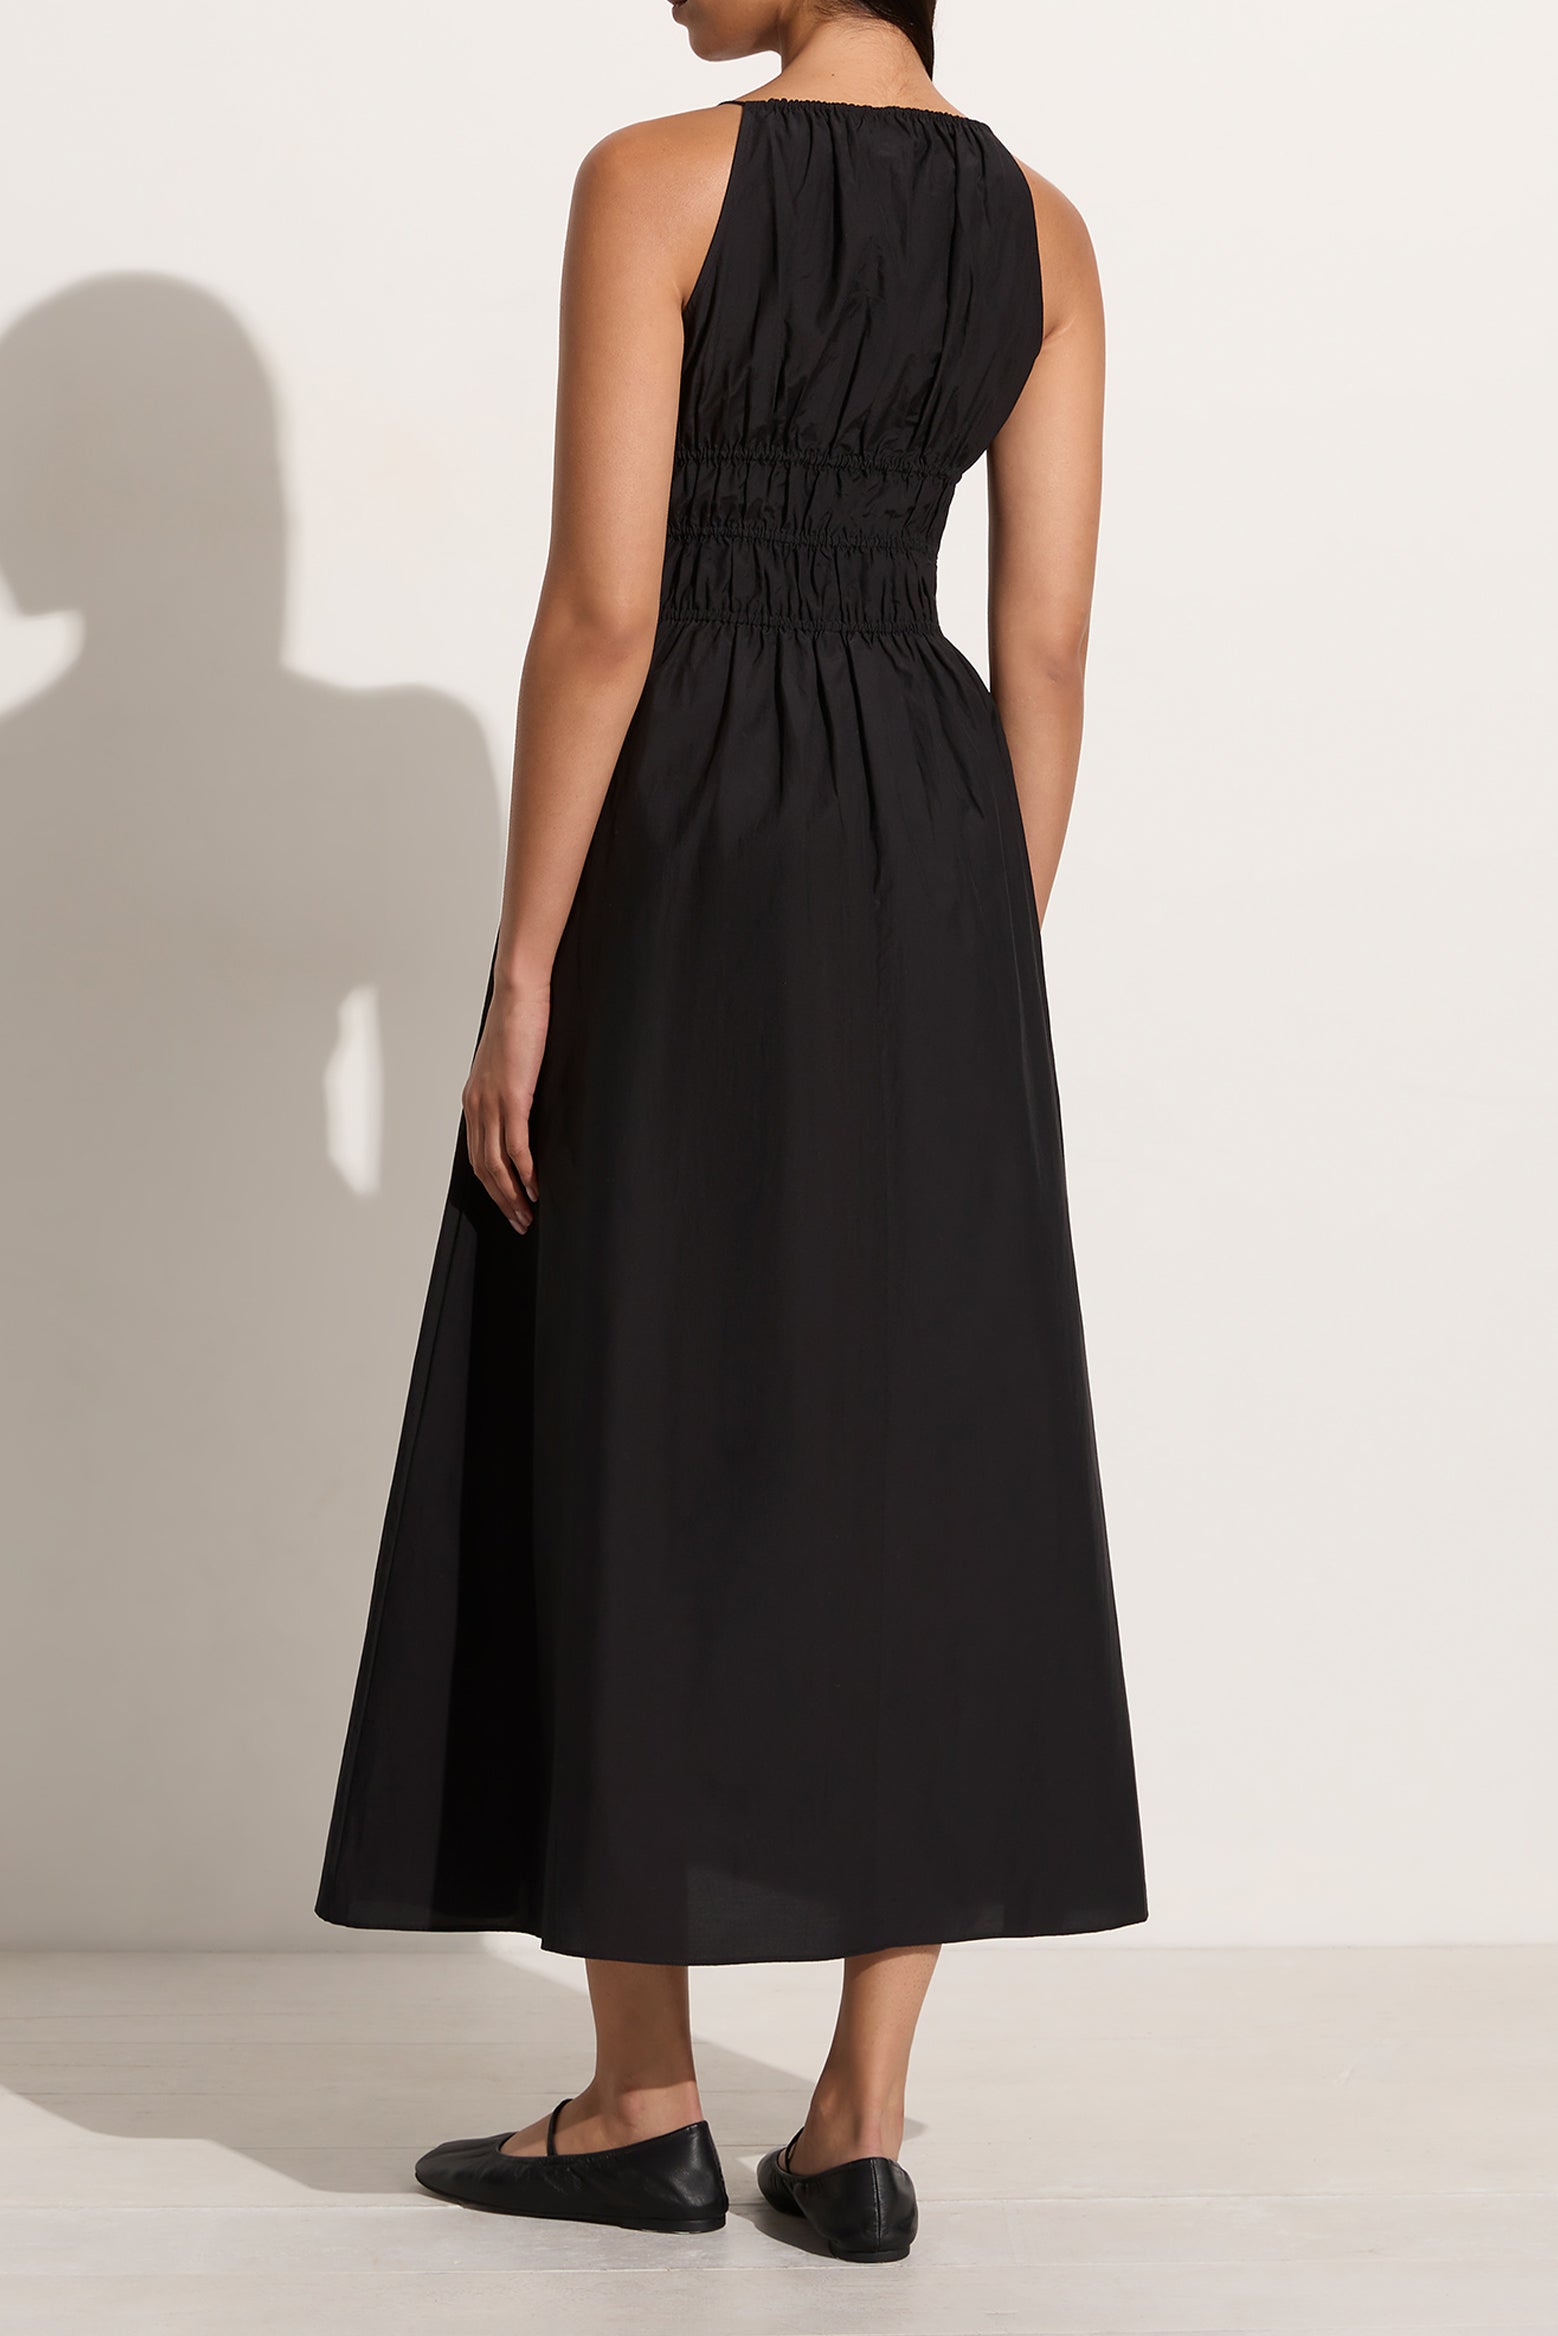 Faithfull The Brand Carinna Midi Dress in Black available at The New Trend Australia.